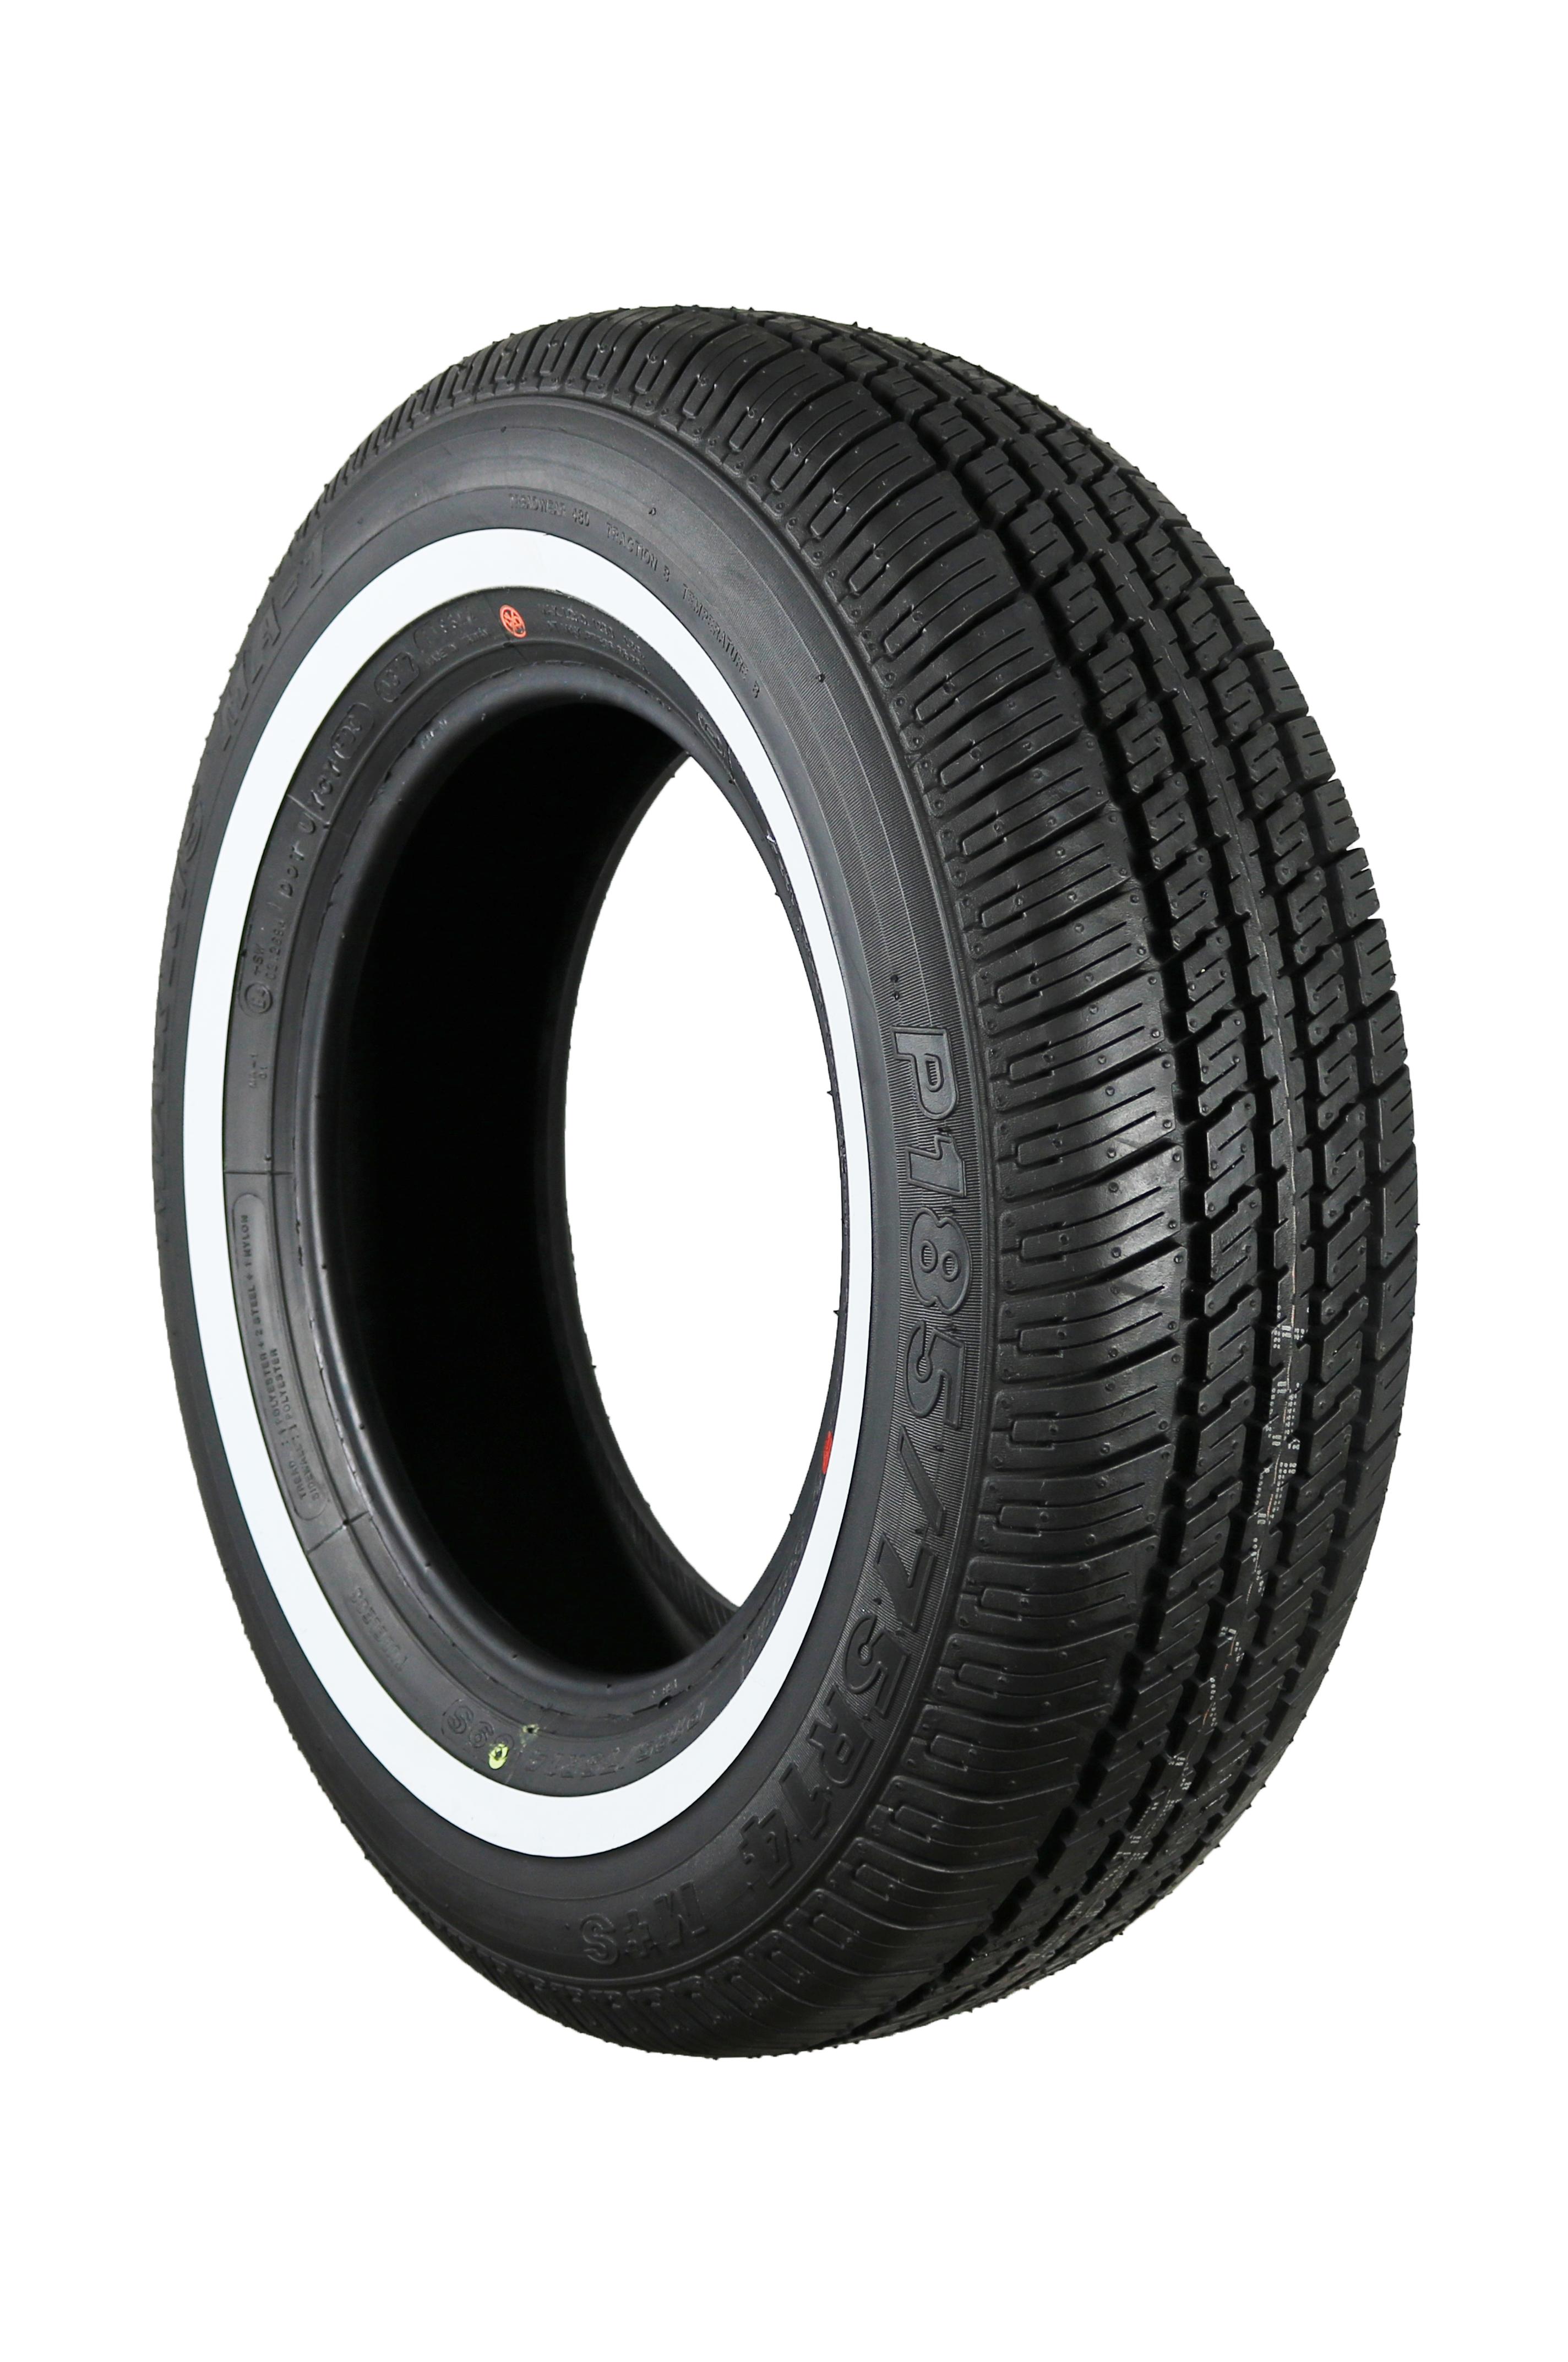 Maxxis MA-1 22mm WSW 185/75R14 89S Tyres & Classic | Vintage